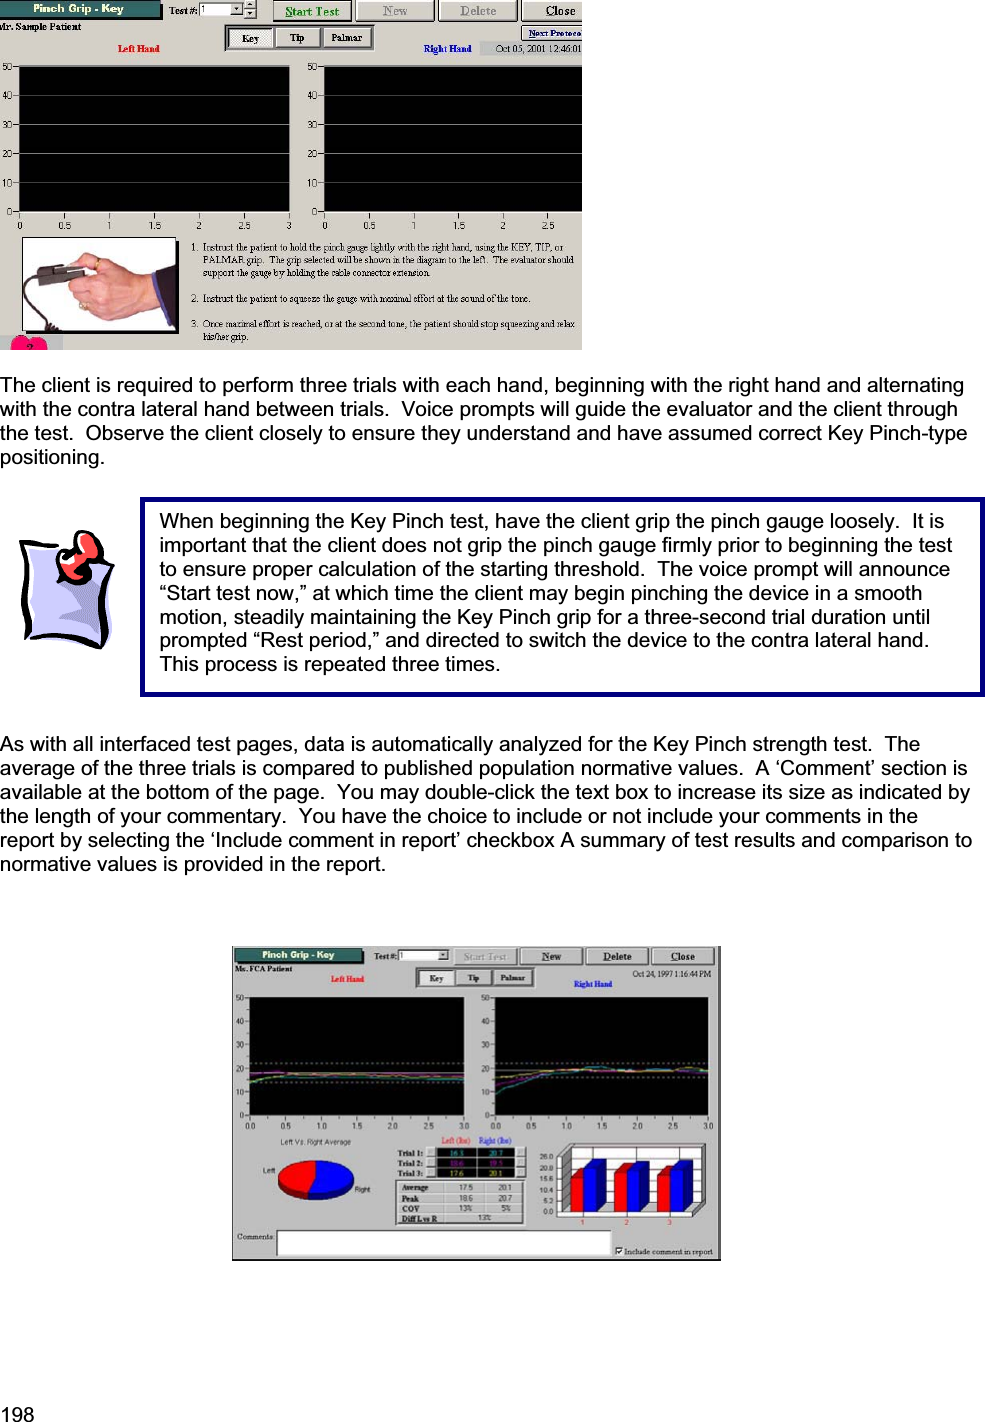 198    The client is required to perform three trials with each hand, beginning with the right hand and alternating with the contra lateral hand between trials.  Voice prompts will guide the evaluator and the client through the test.  Observe the client closely to ensure they understand and have assumed correct Key Pinch-type positioning. As with all interfaced test pages, data is automatically analyzed for the Key Pinch strength test.  The average of the three trials is compared to published population normative values.  A ‘Comment’ section is available at the bottom of the page.  You may double-click the text box to increase its size as indicated by the length of your commentary.  You have the choice to include or not include your comments in the report by selecting the ‘Include comment in report’ checkbox A summary of test results and comparison to normative values is provided in the report.   When beginning the Key Pinch test, have the client grip the pinch gauge loosely.  It is important that the client does not grip the pinch gauge firmly prior to beginning the test to ensure proper calculation of the starting threshold.  The voice prompt will announce “Start test now,” at which time the client may begin pinching the device in a smooth motion, steadily maintaining the Key Pinch grip for a three-second trial duration until prompted “Rest period,” and directed to switch the device to the contra lateral hand.  This process is repeated three times. 